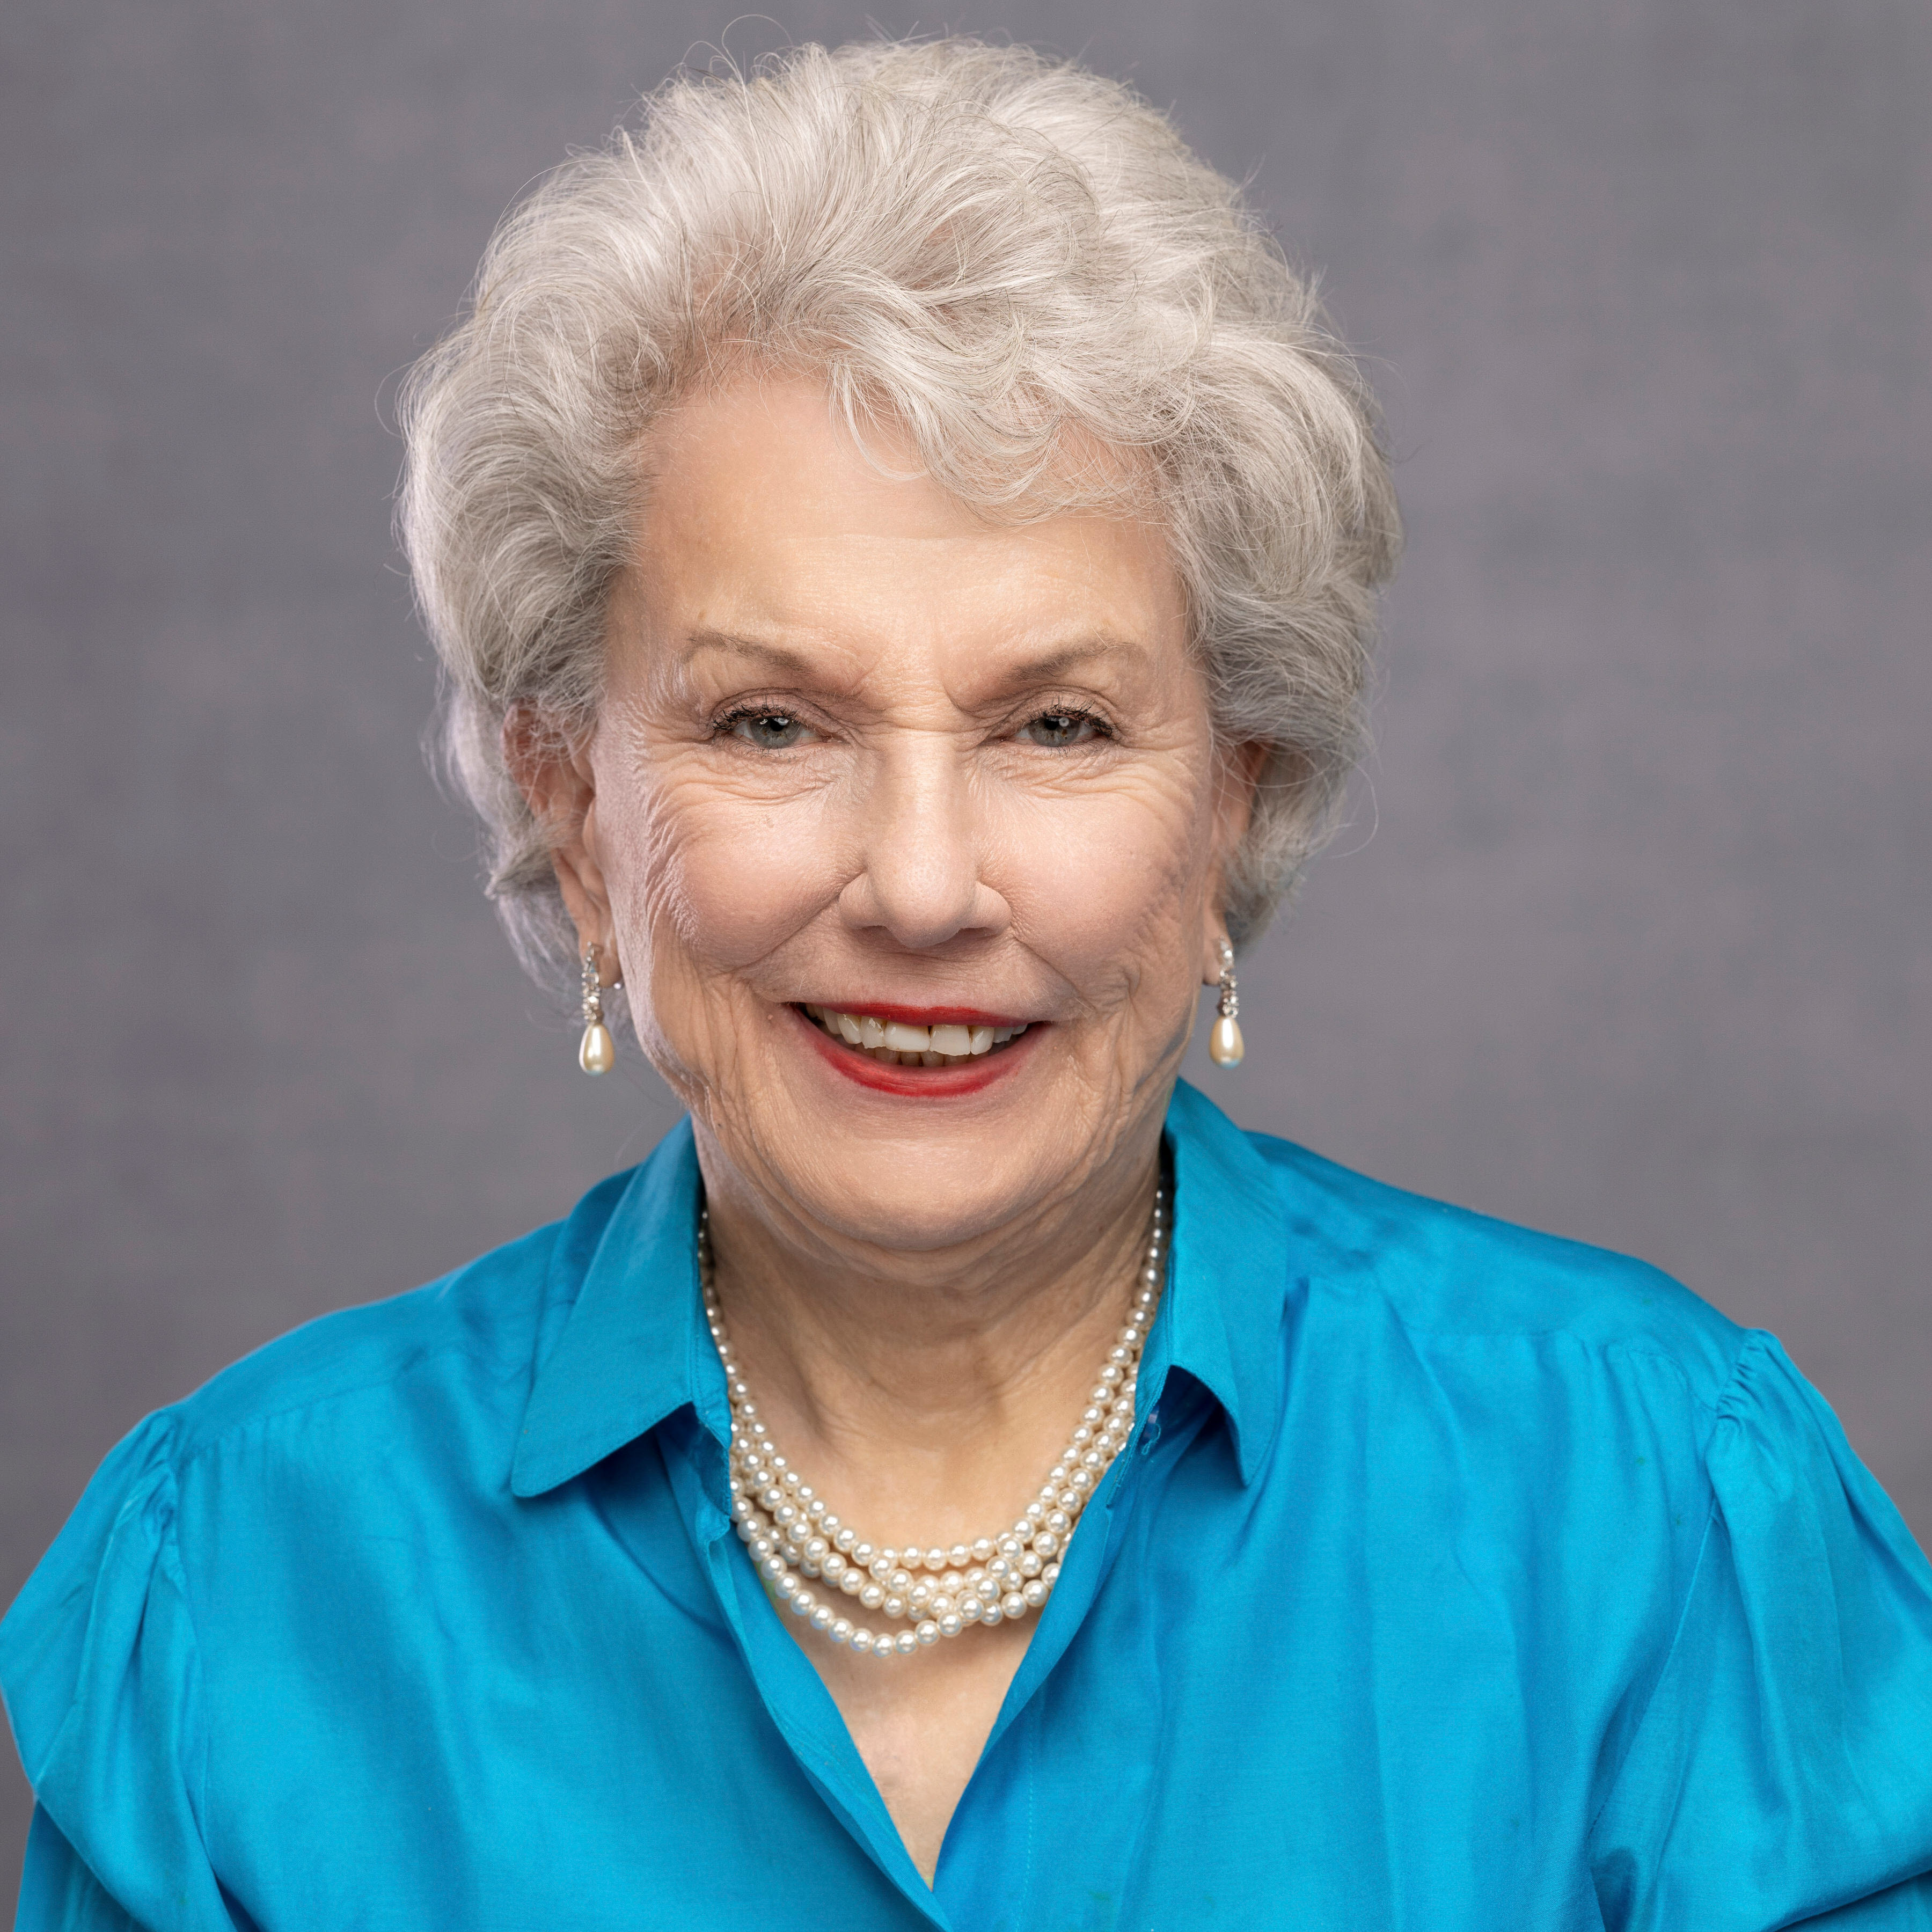 A portrait of Mary Sue Foster. She is wearing a light blue blouse.